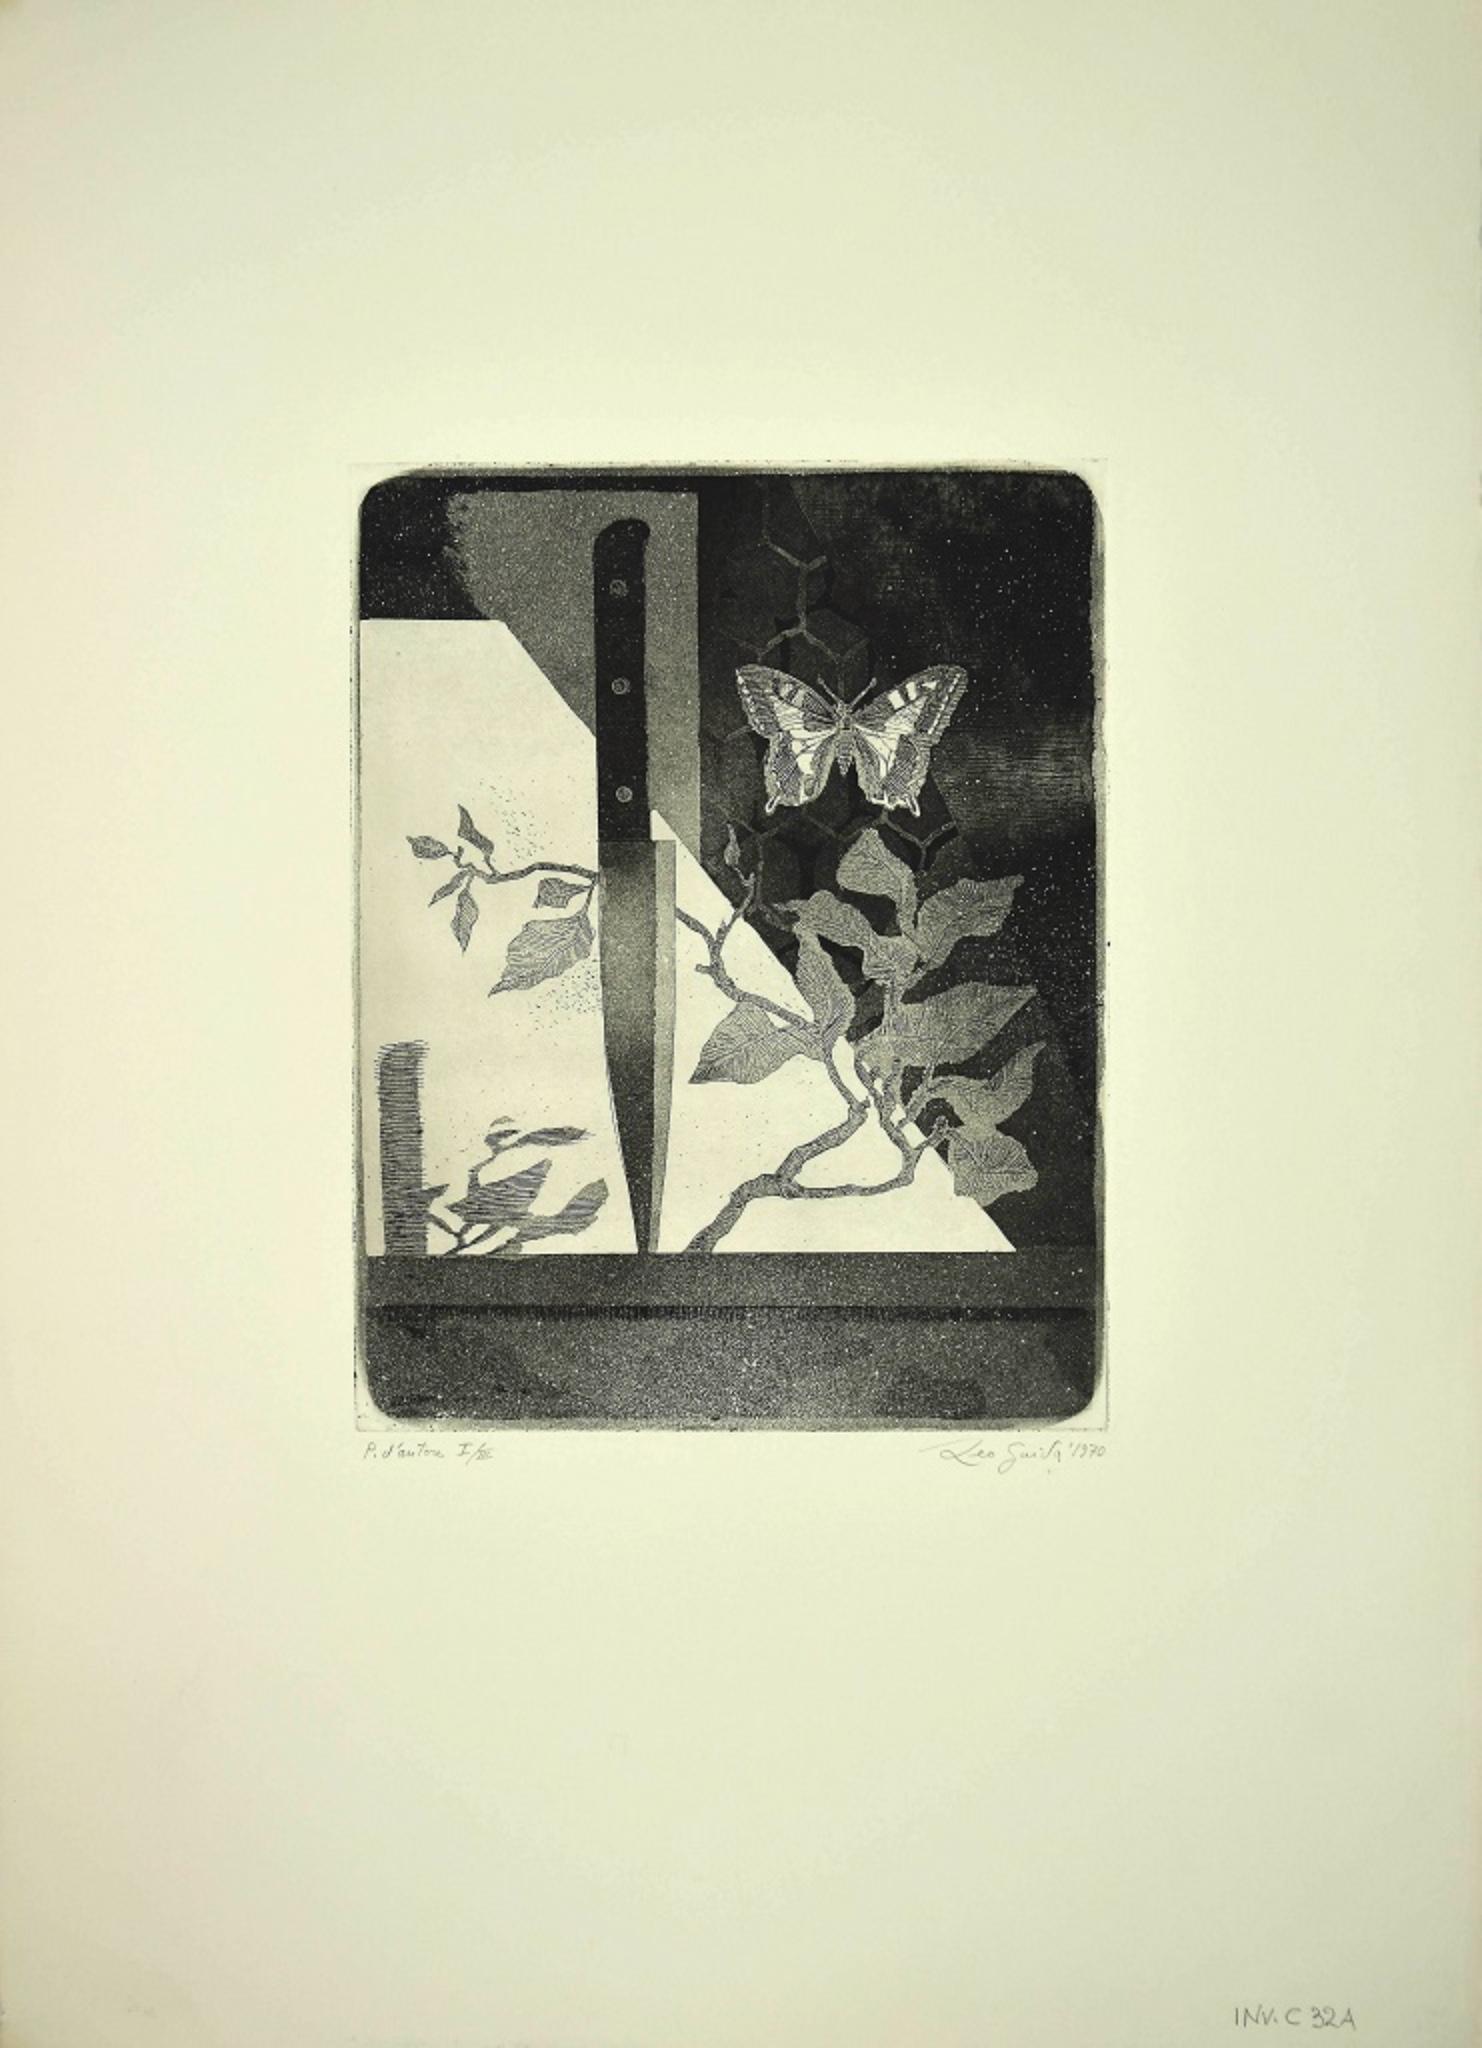 Butterfly and Knife - Original Etching by Leo Guida - 1970